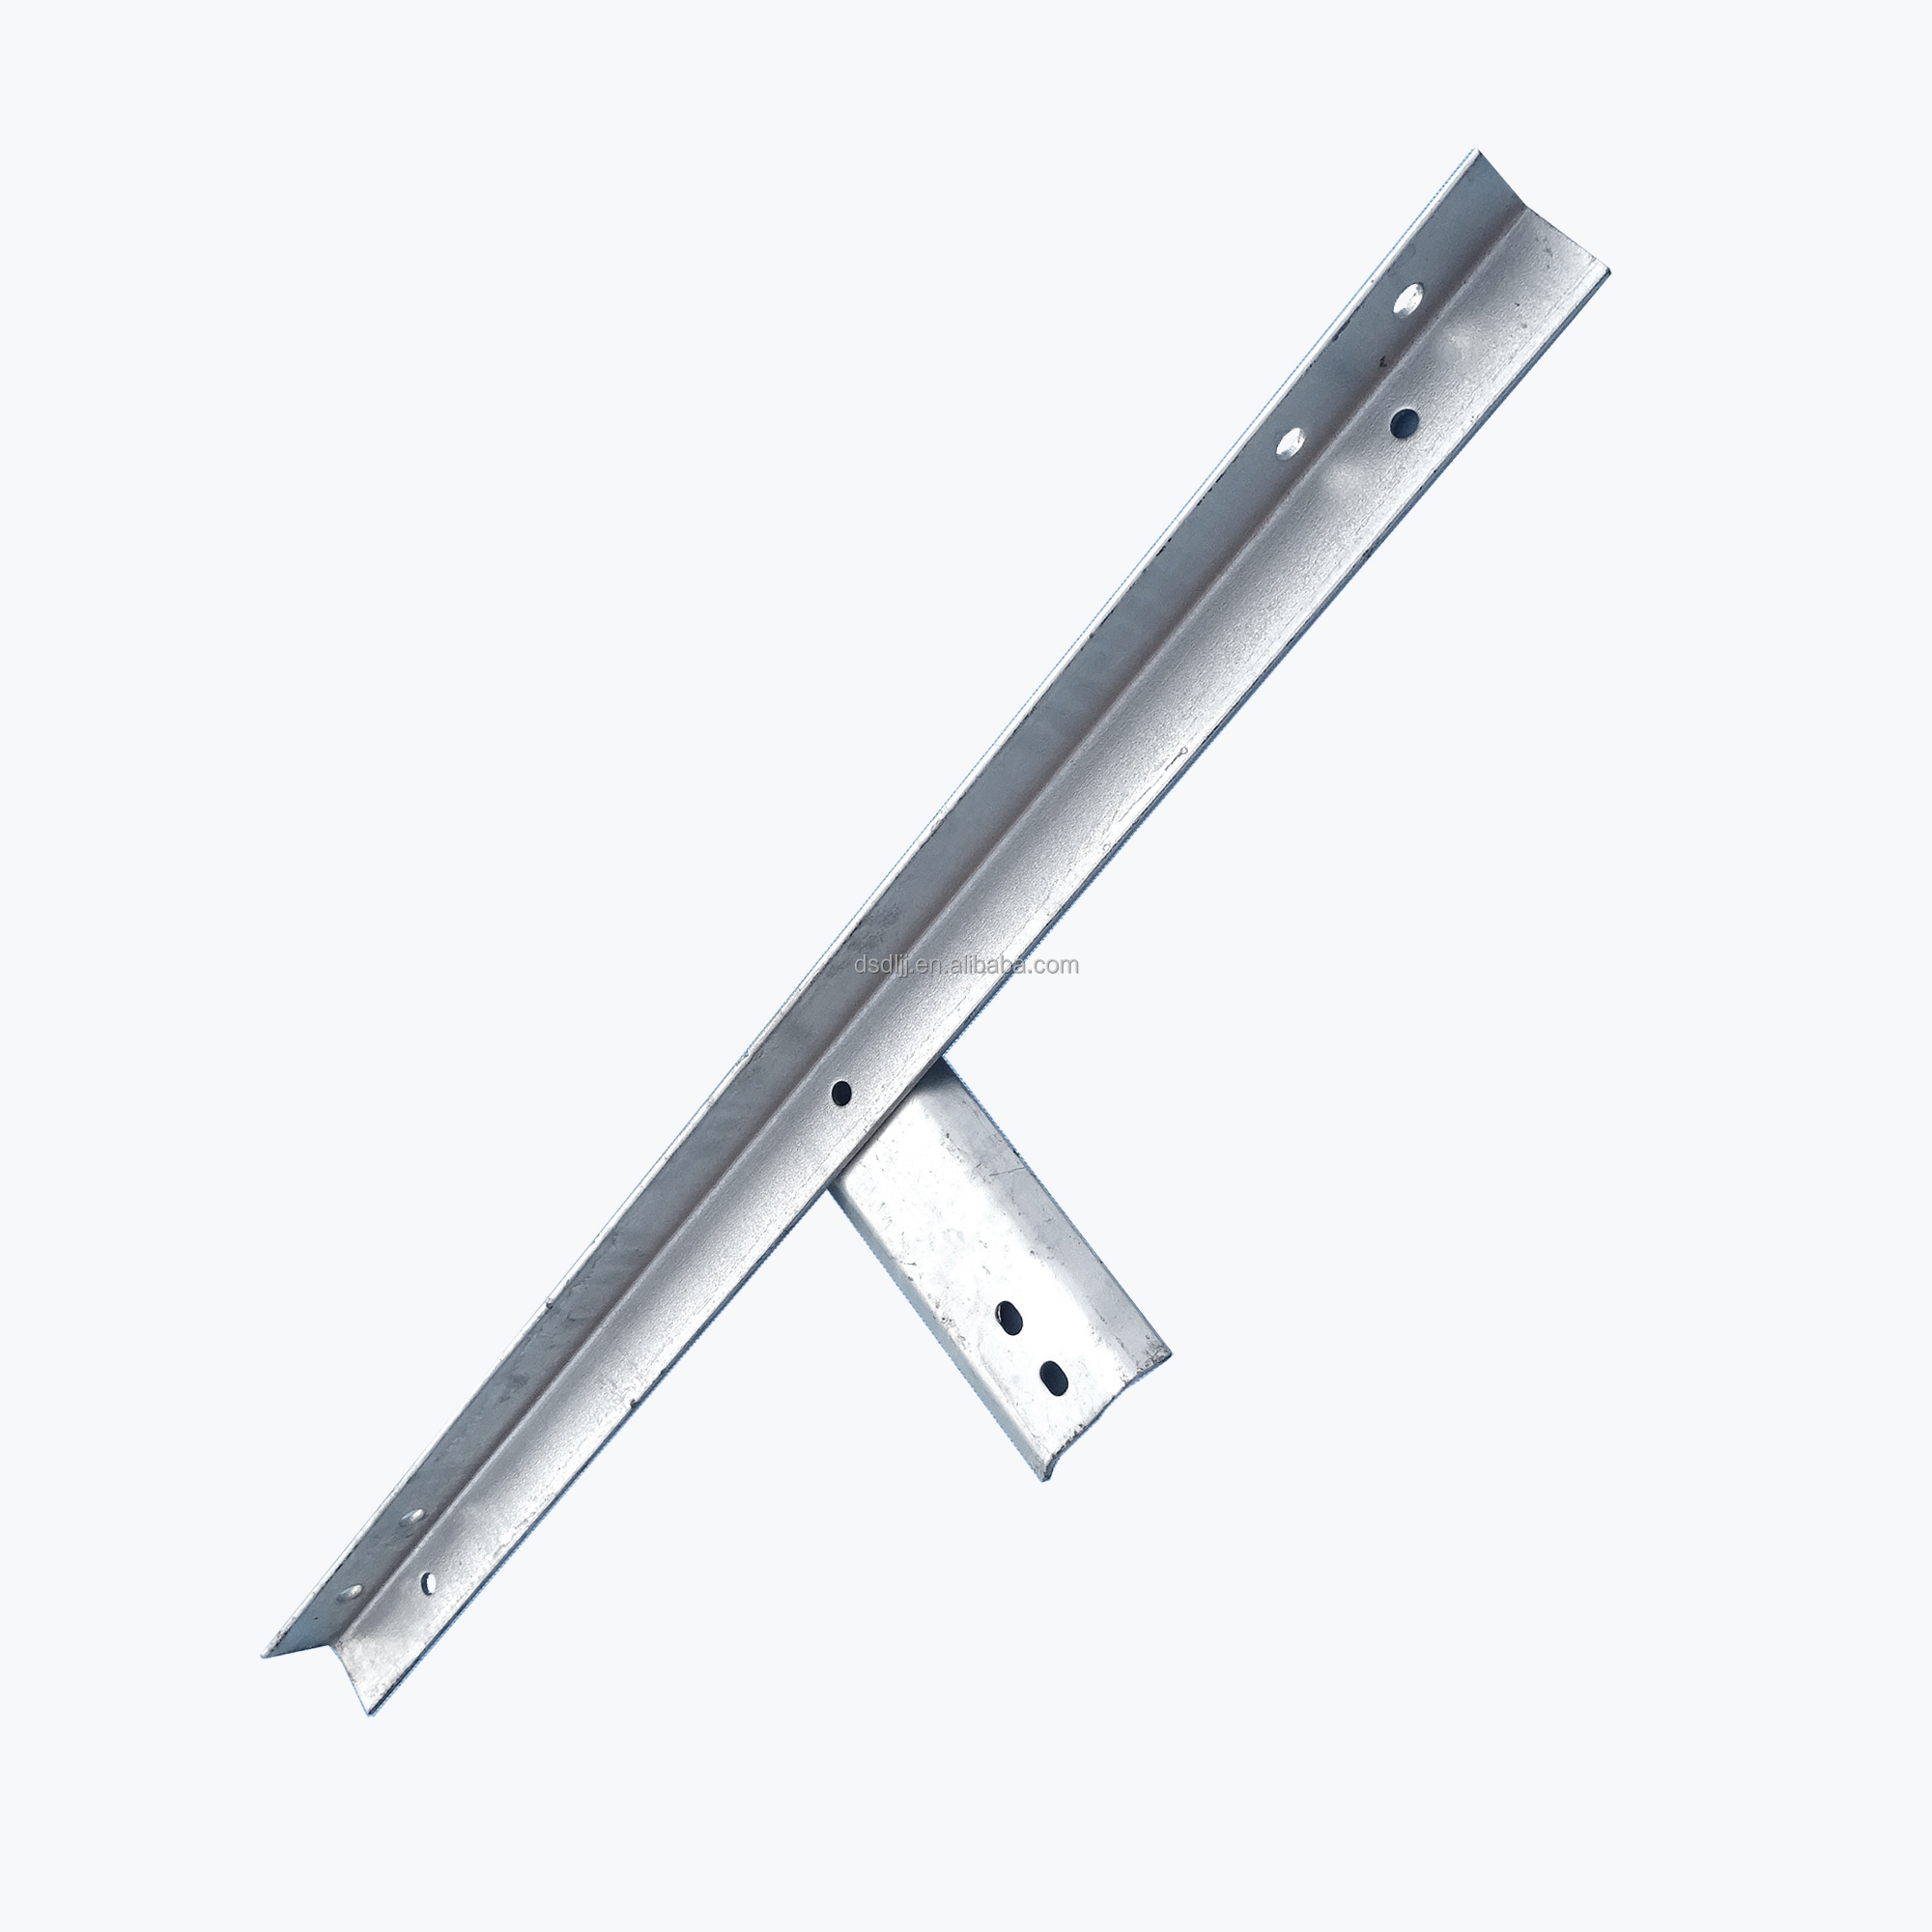 Hot dip Galvanized Electric pole Angle Steel Cross arm nga adunay Support Cross arm nga adunay center mounting plate